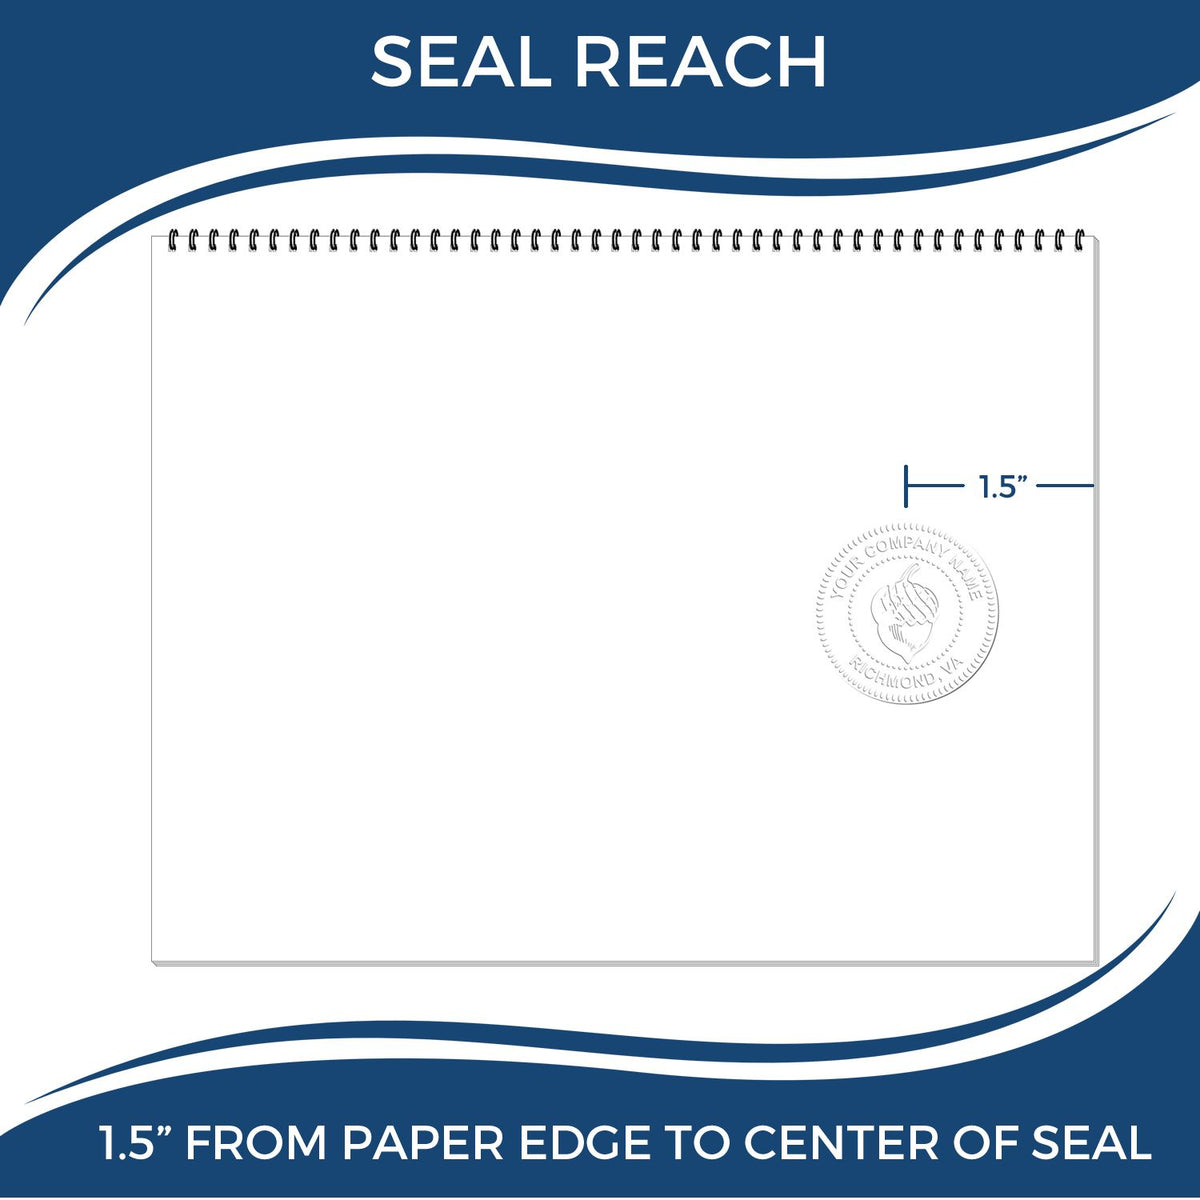 An infographic showing the seal reach which is represented by a ruler and a miniature seal image of the Handheld Pennsylvania Professional Engineer Embosser